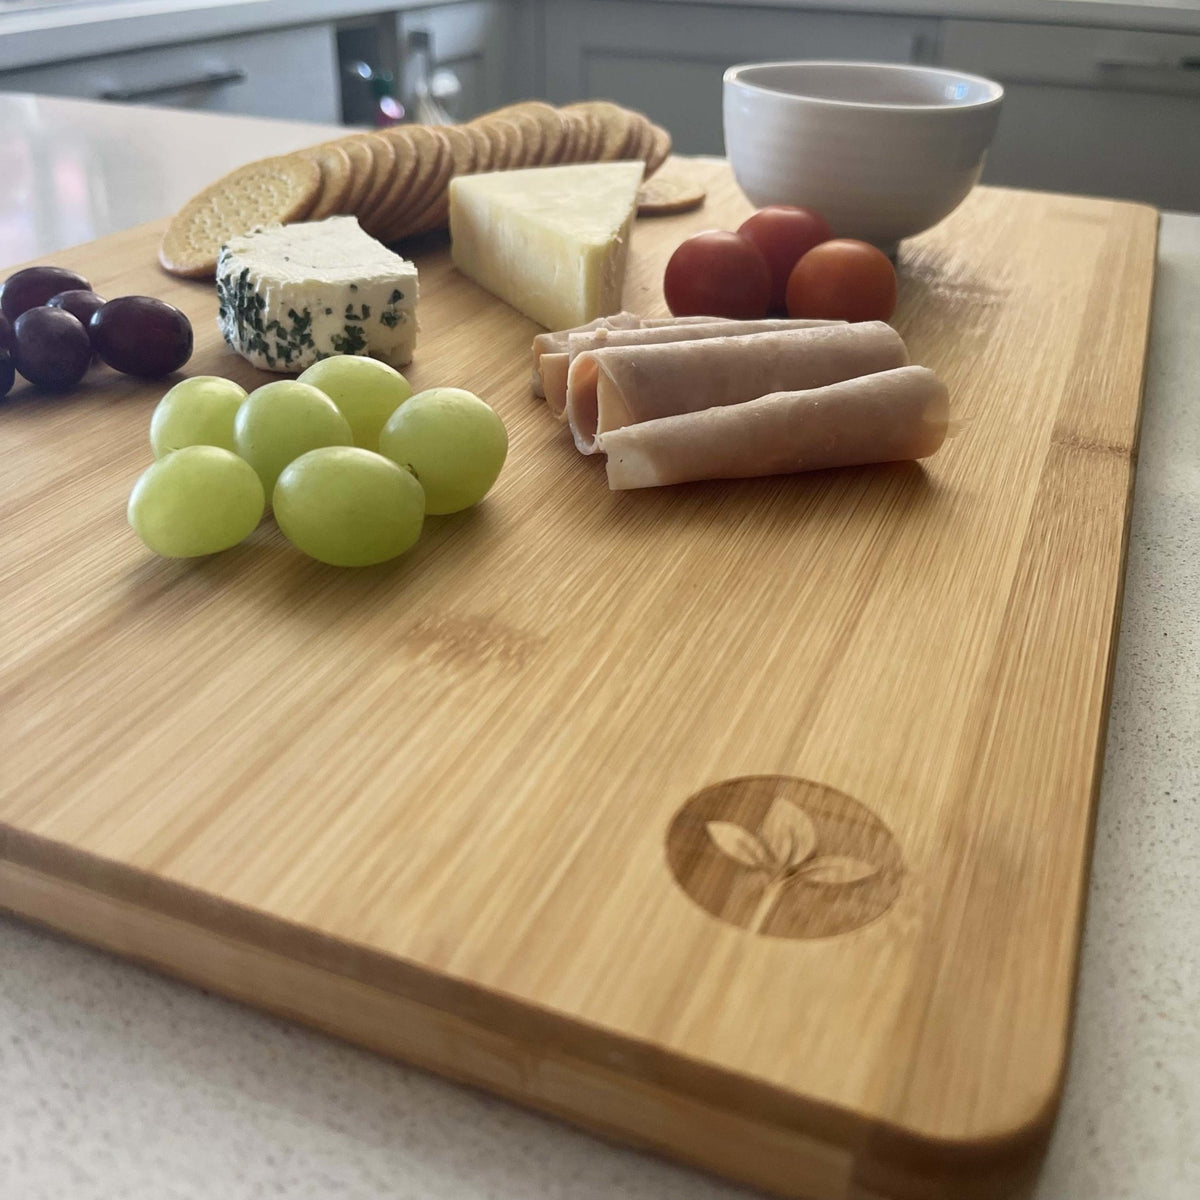 Large Bamboo Serving Board platter, on kitchen bench